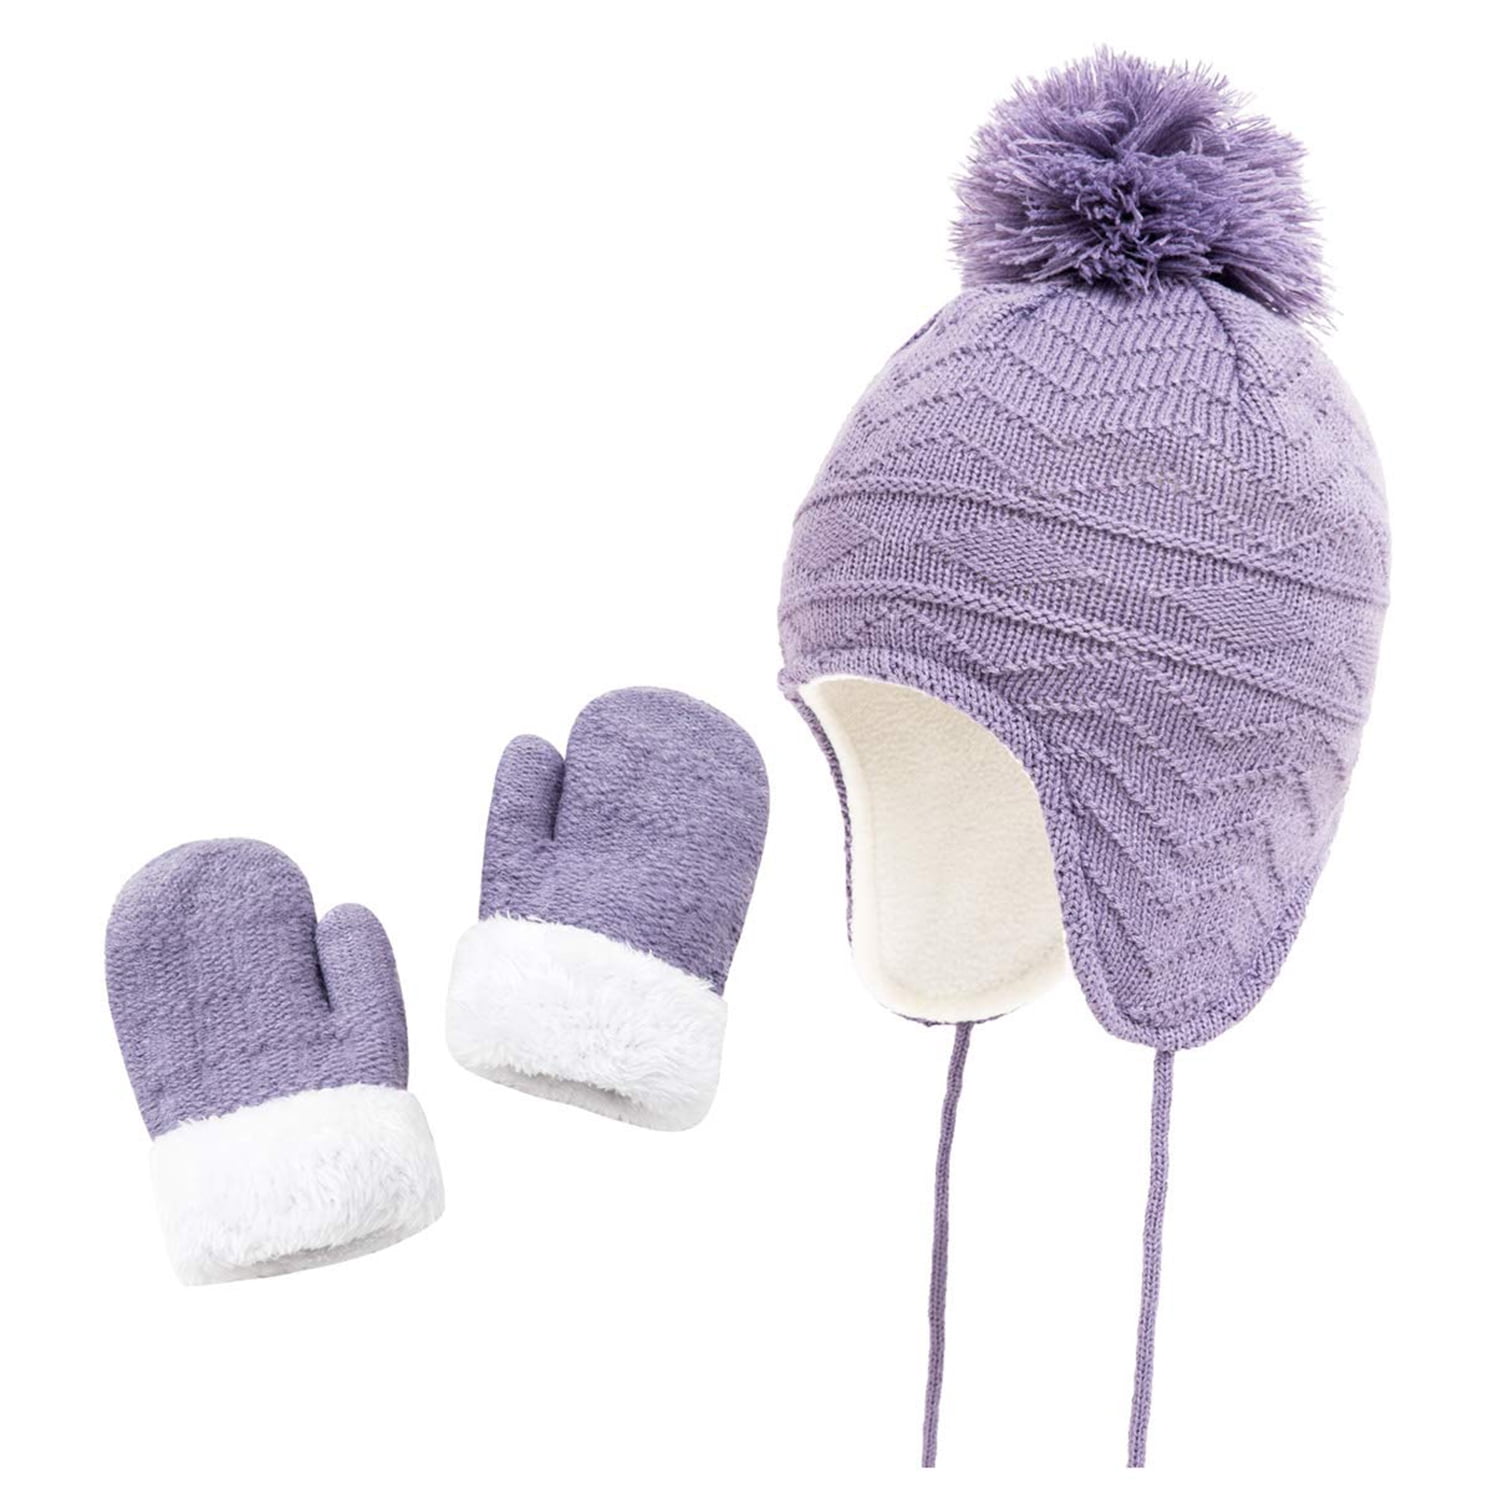 Kids Hat Scarf Gloves Set Girls Winter Knit Cap with Beanie Ear Flaps 3 Pcs Sets for Toddler Age 2-5 